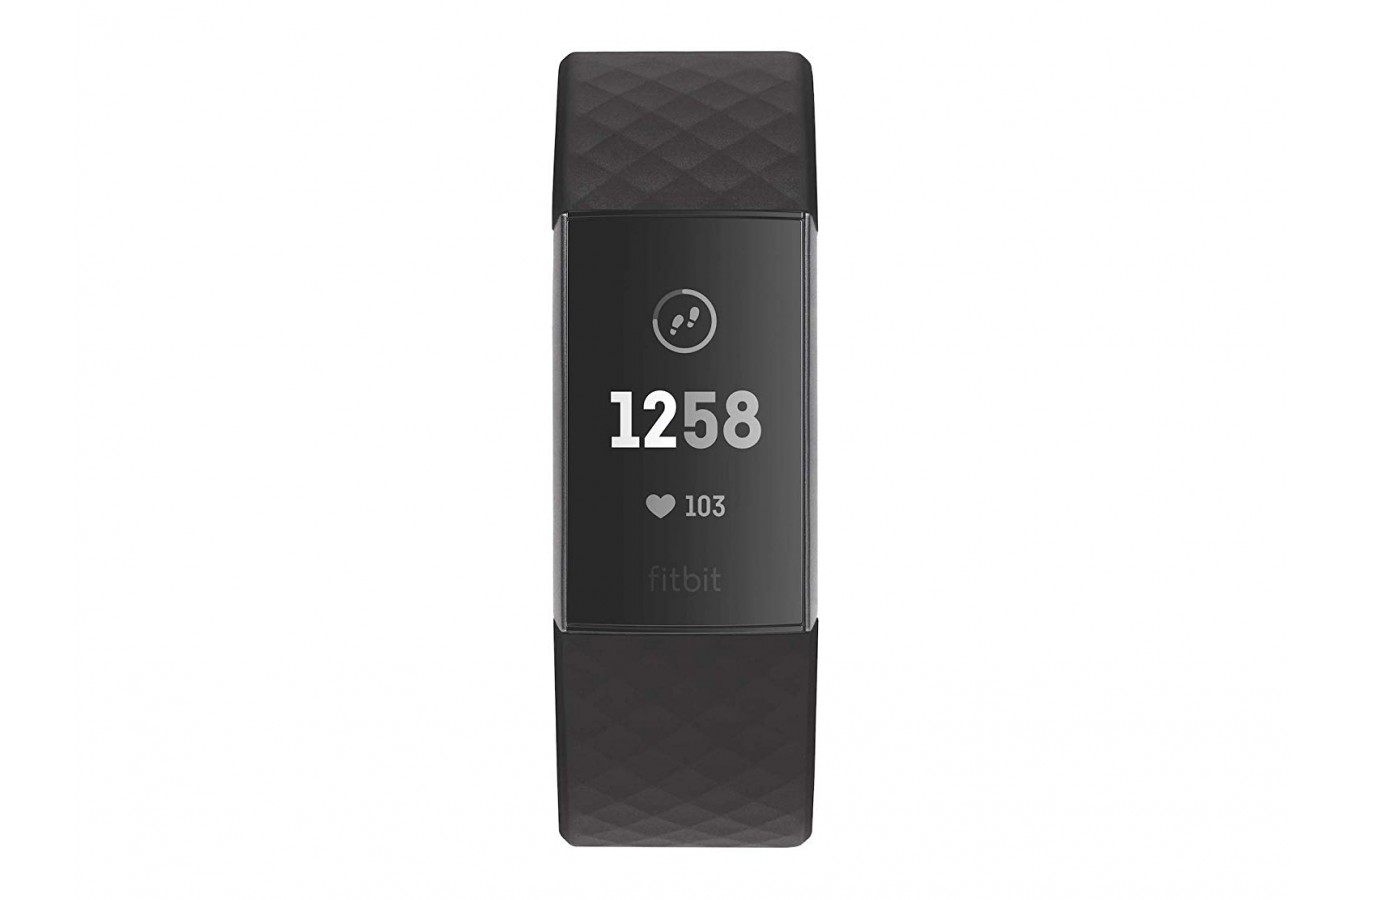 The Fitbit Charge 3 offers an extra wide 39.83 mm screen for easier viewing.